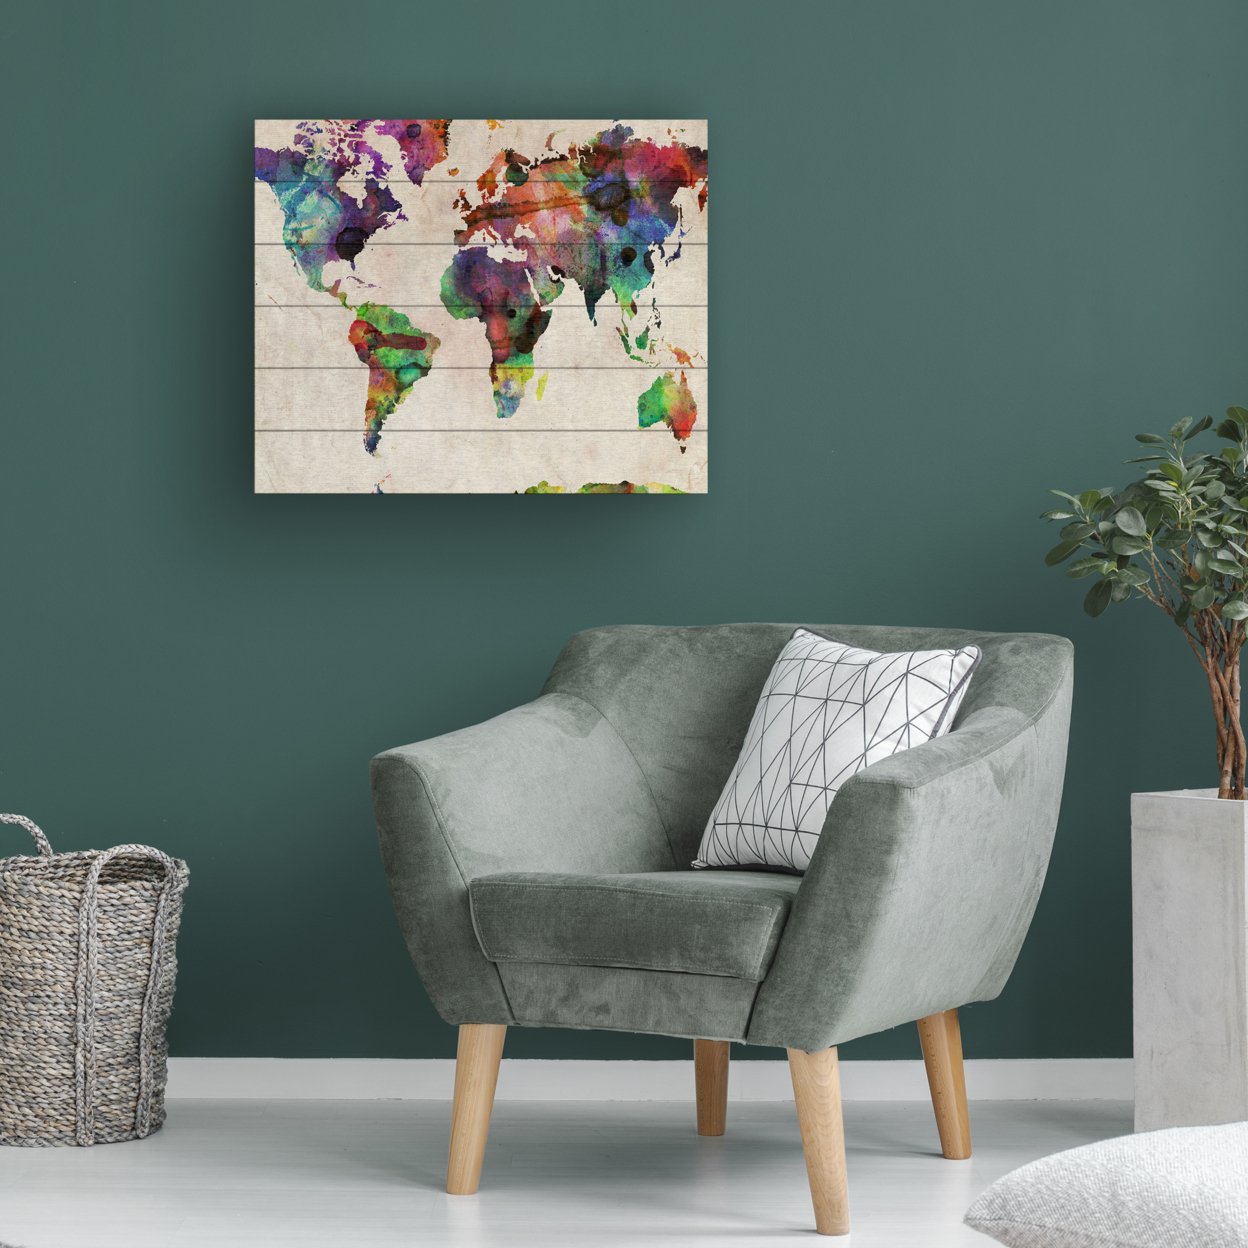 Wooden Slat Art 18 X 22 Inches Titled Urban Watercolor World Map Ready To Hang Home Decor Picture